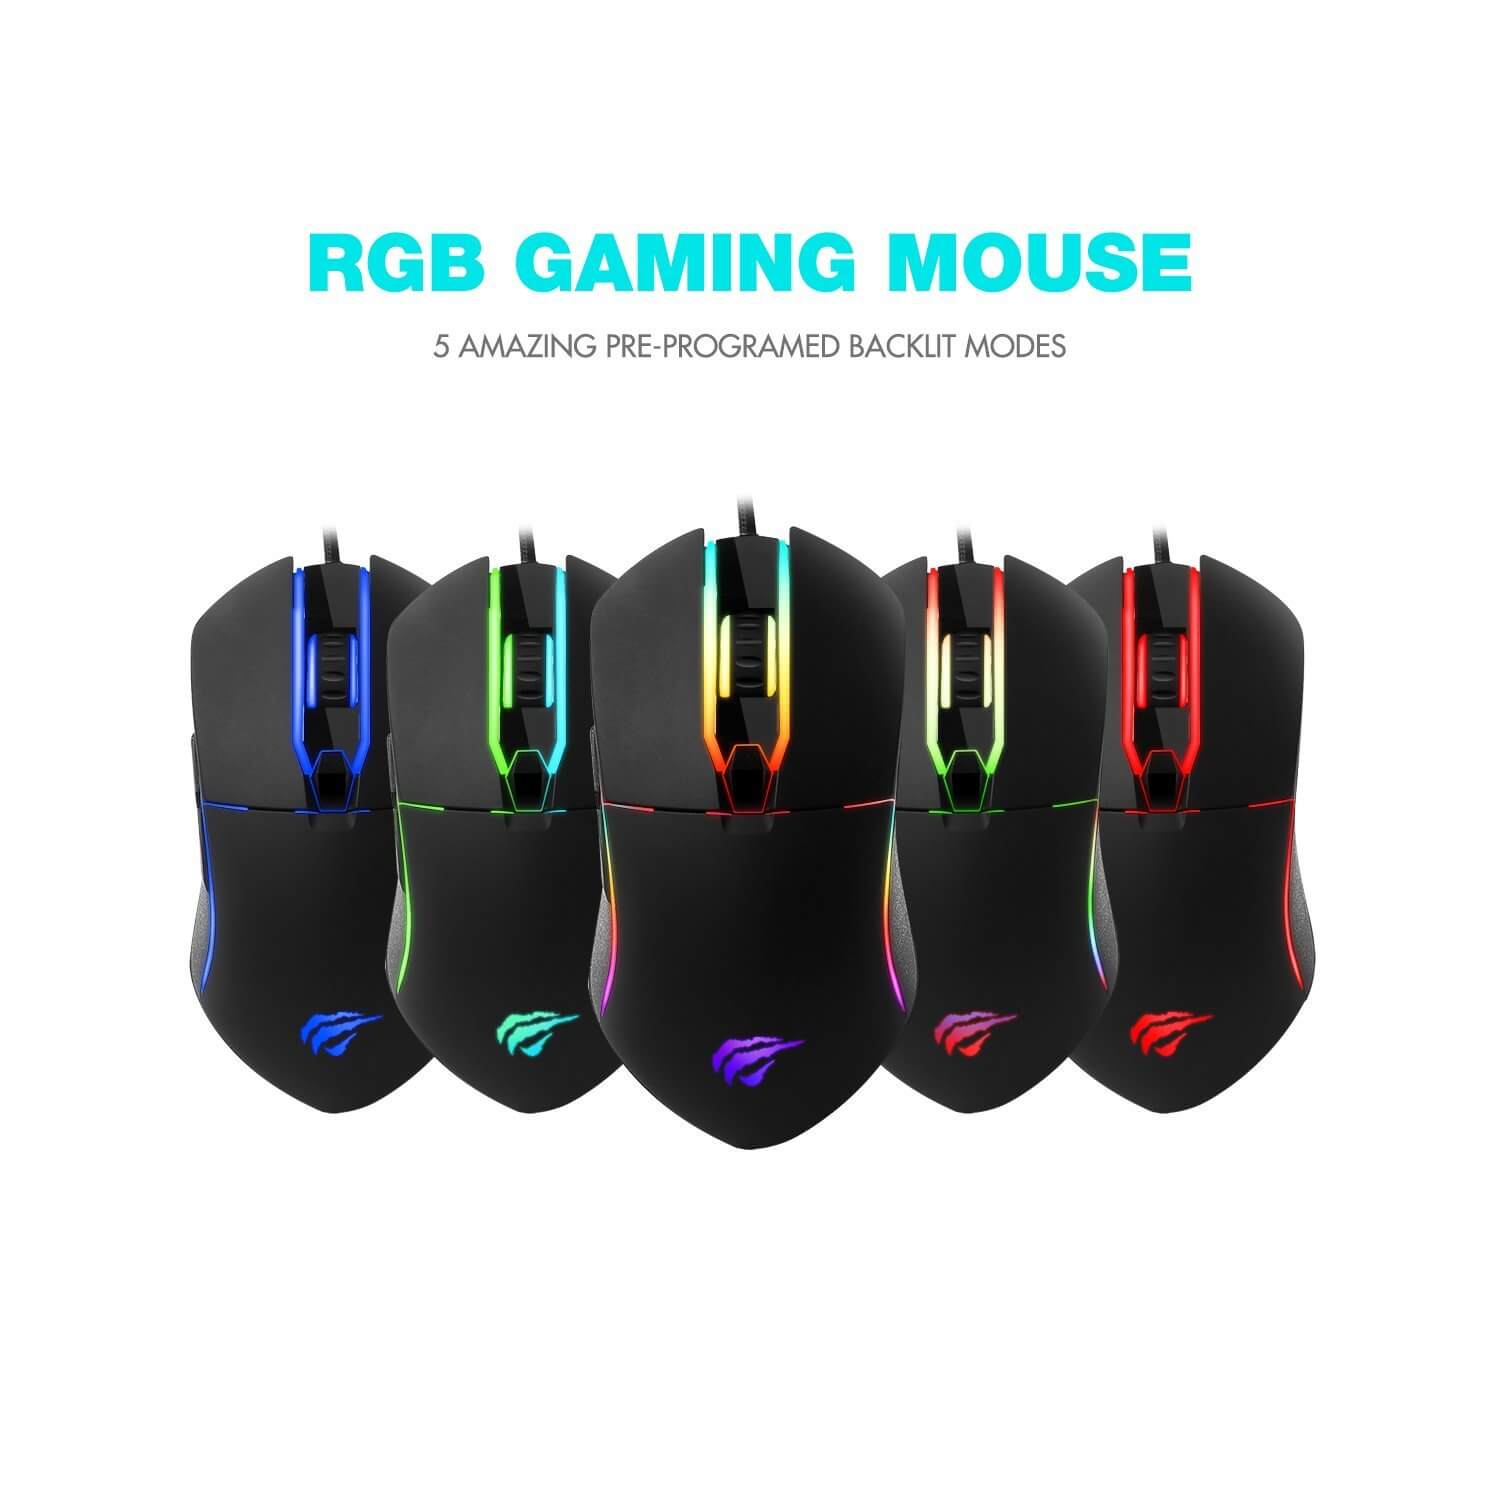 HAVIT HV-MS761 6-Button Gaming Mouse with Avago A3050 Chipset, Up to 4000 DPI, RGB